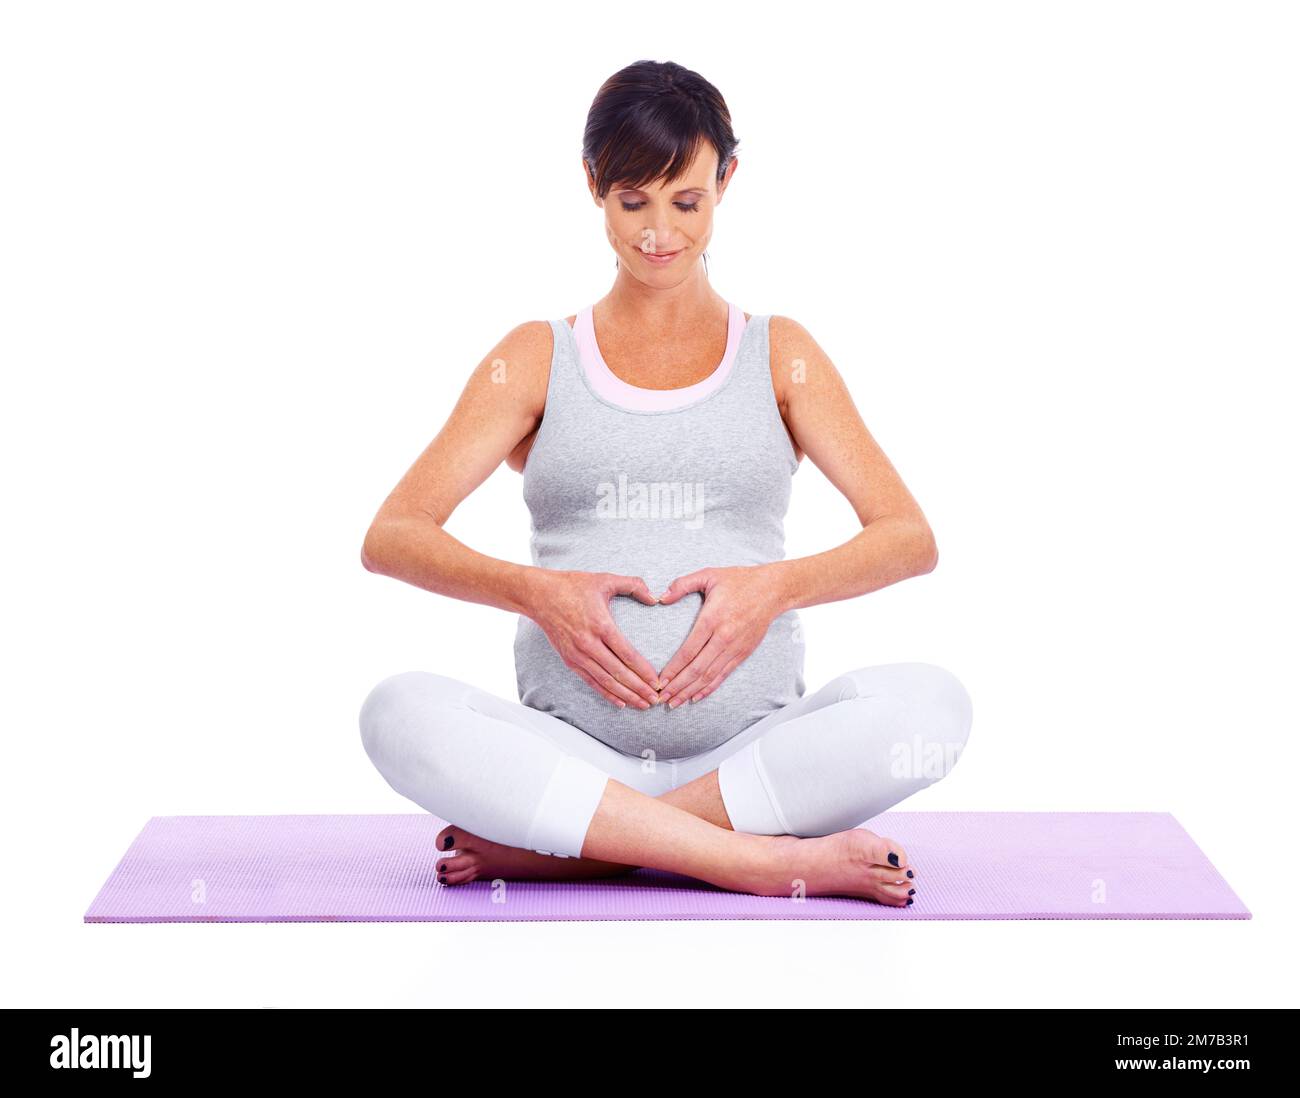 Calm and tranquility for mom and baby. A young expectant mother meditating peacefully while isolated on white. Stock Photo